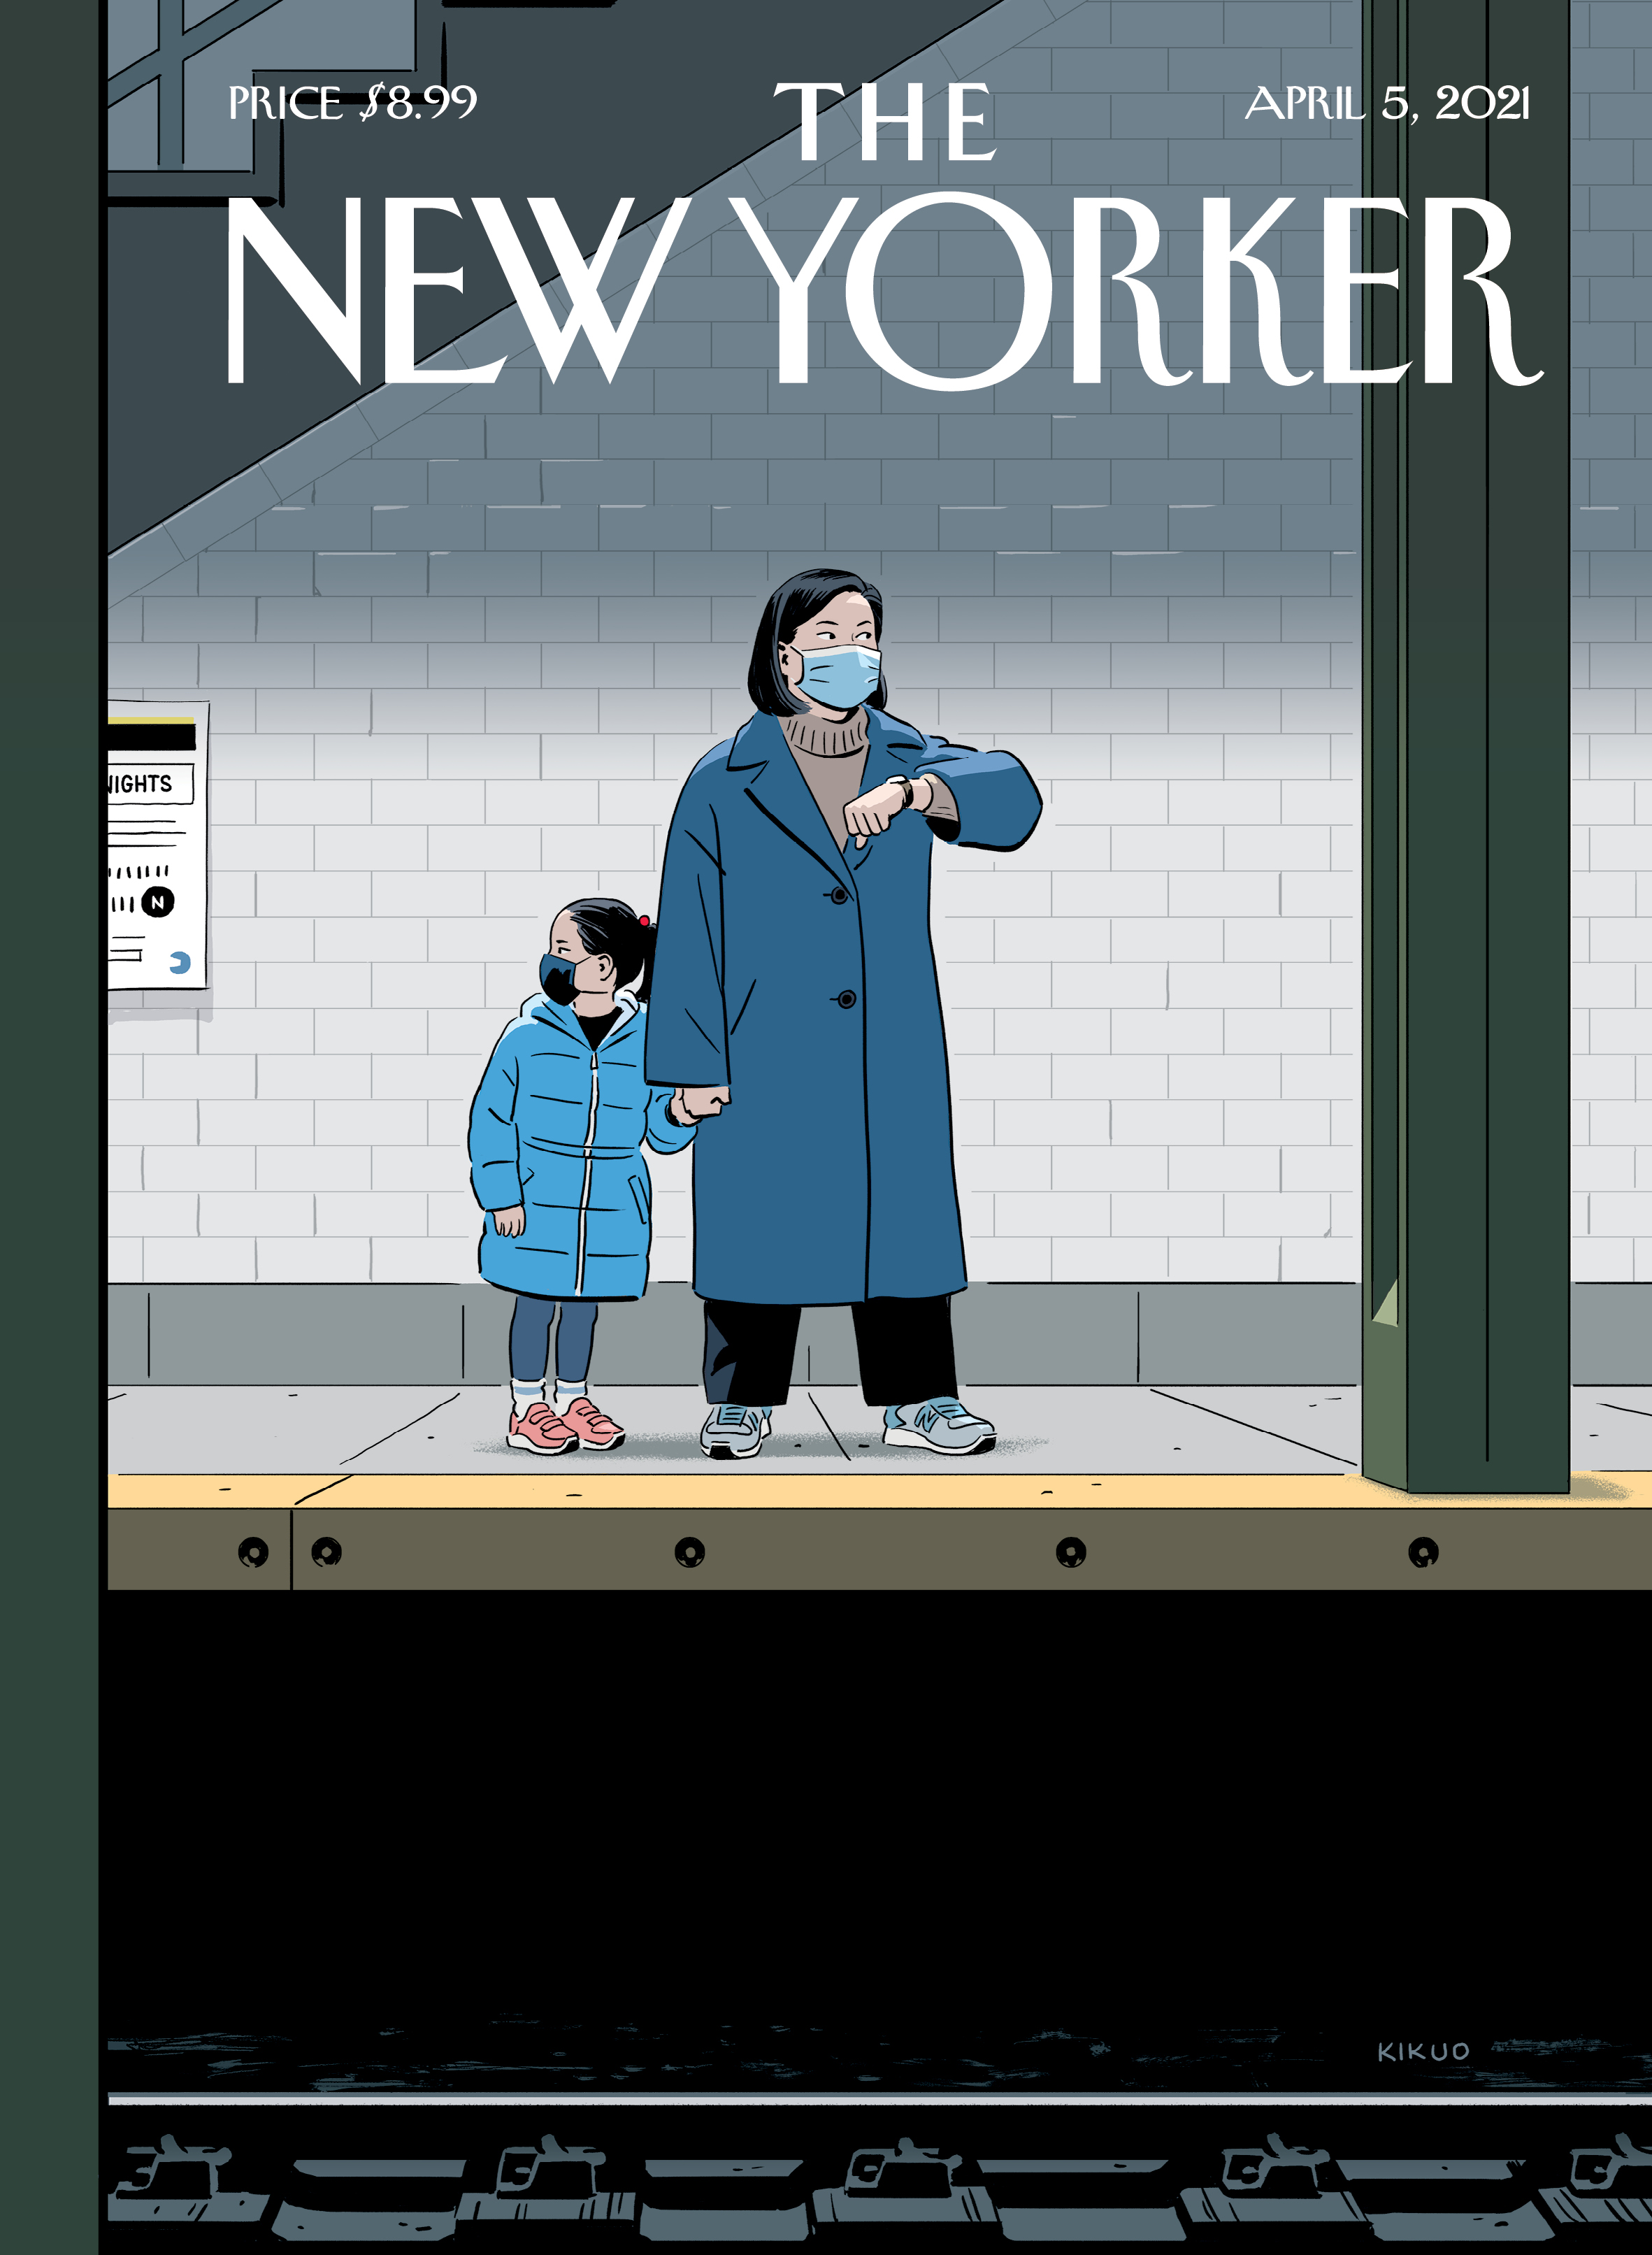 The New Yorker - Delayed - April 5 2021